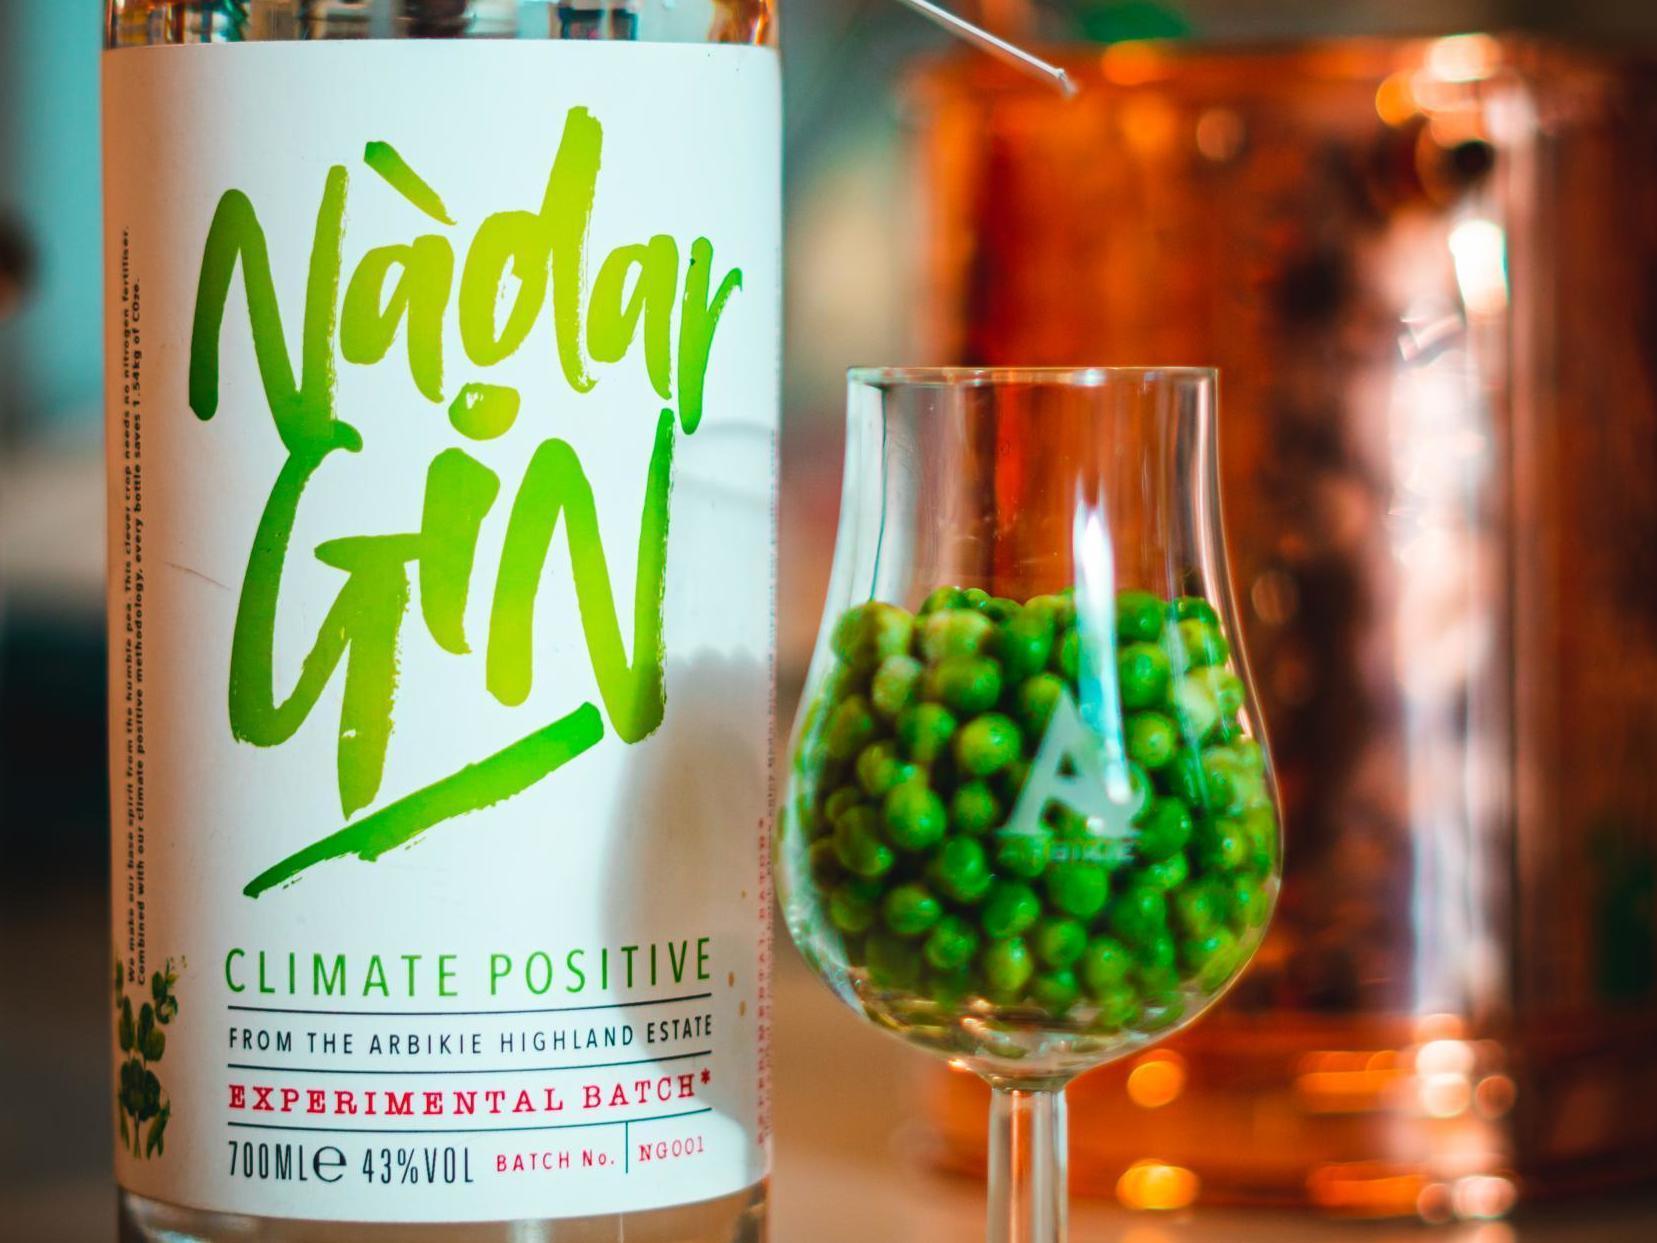 Scientists create world's first 'climate-positive' gin using garden peas